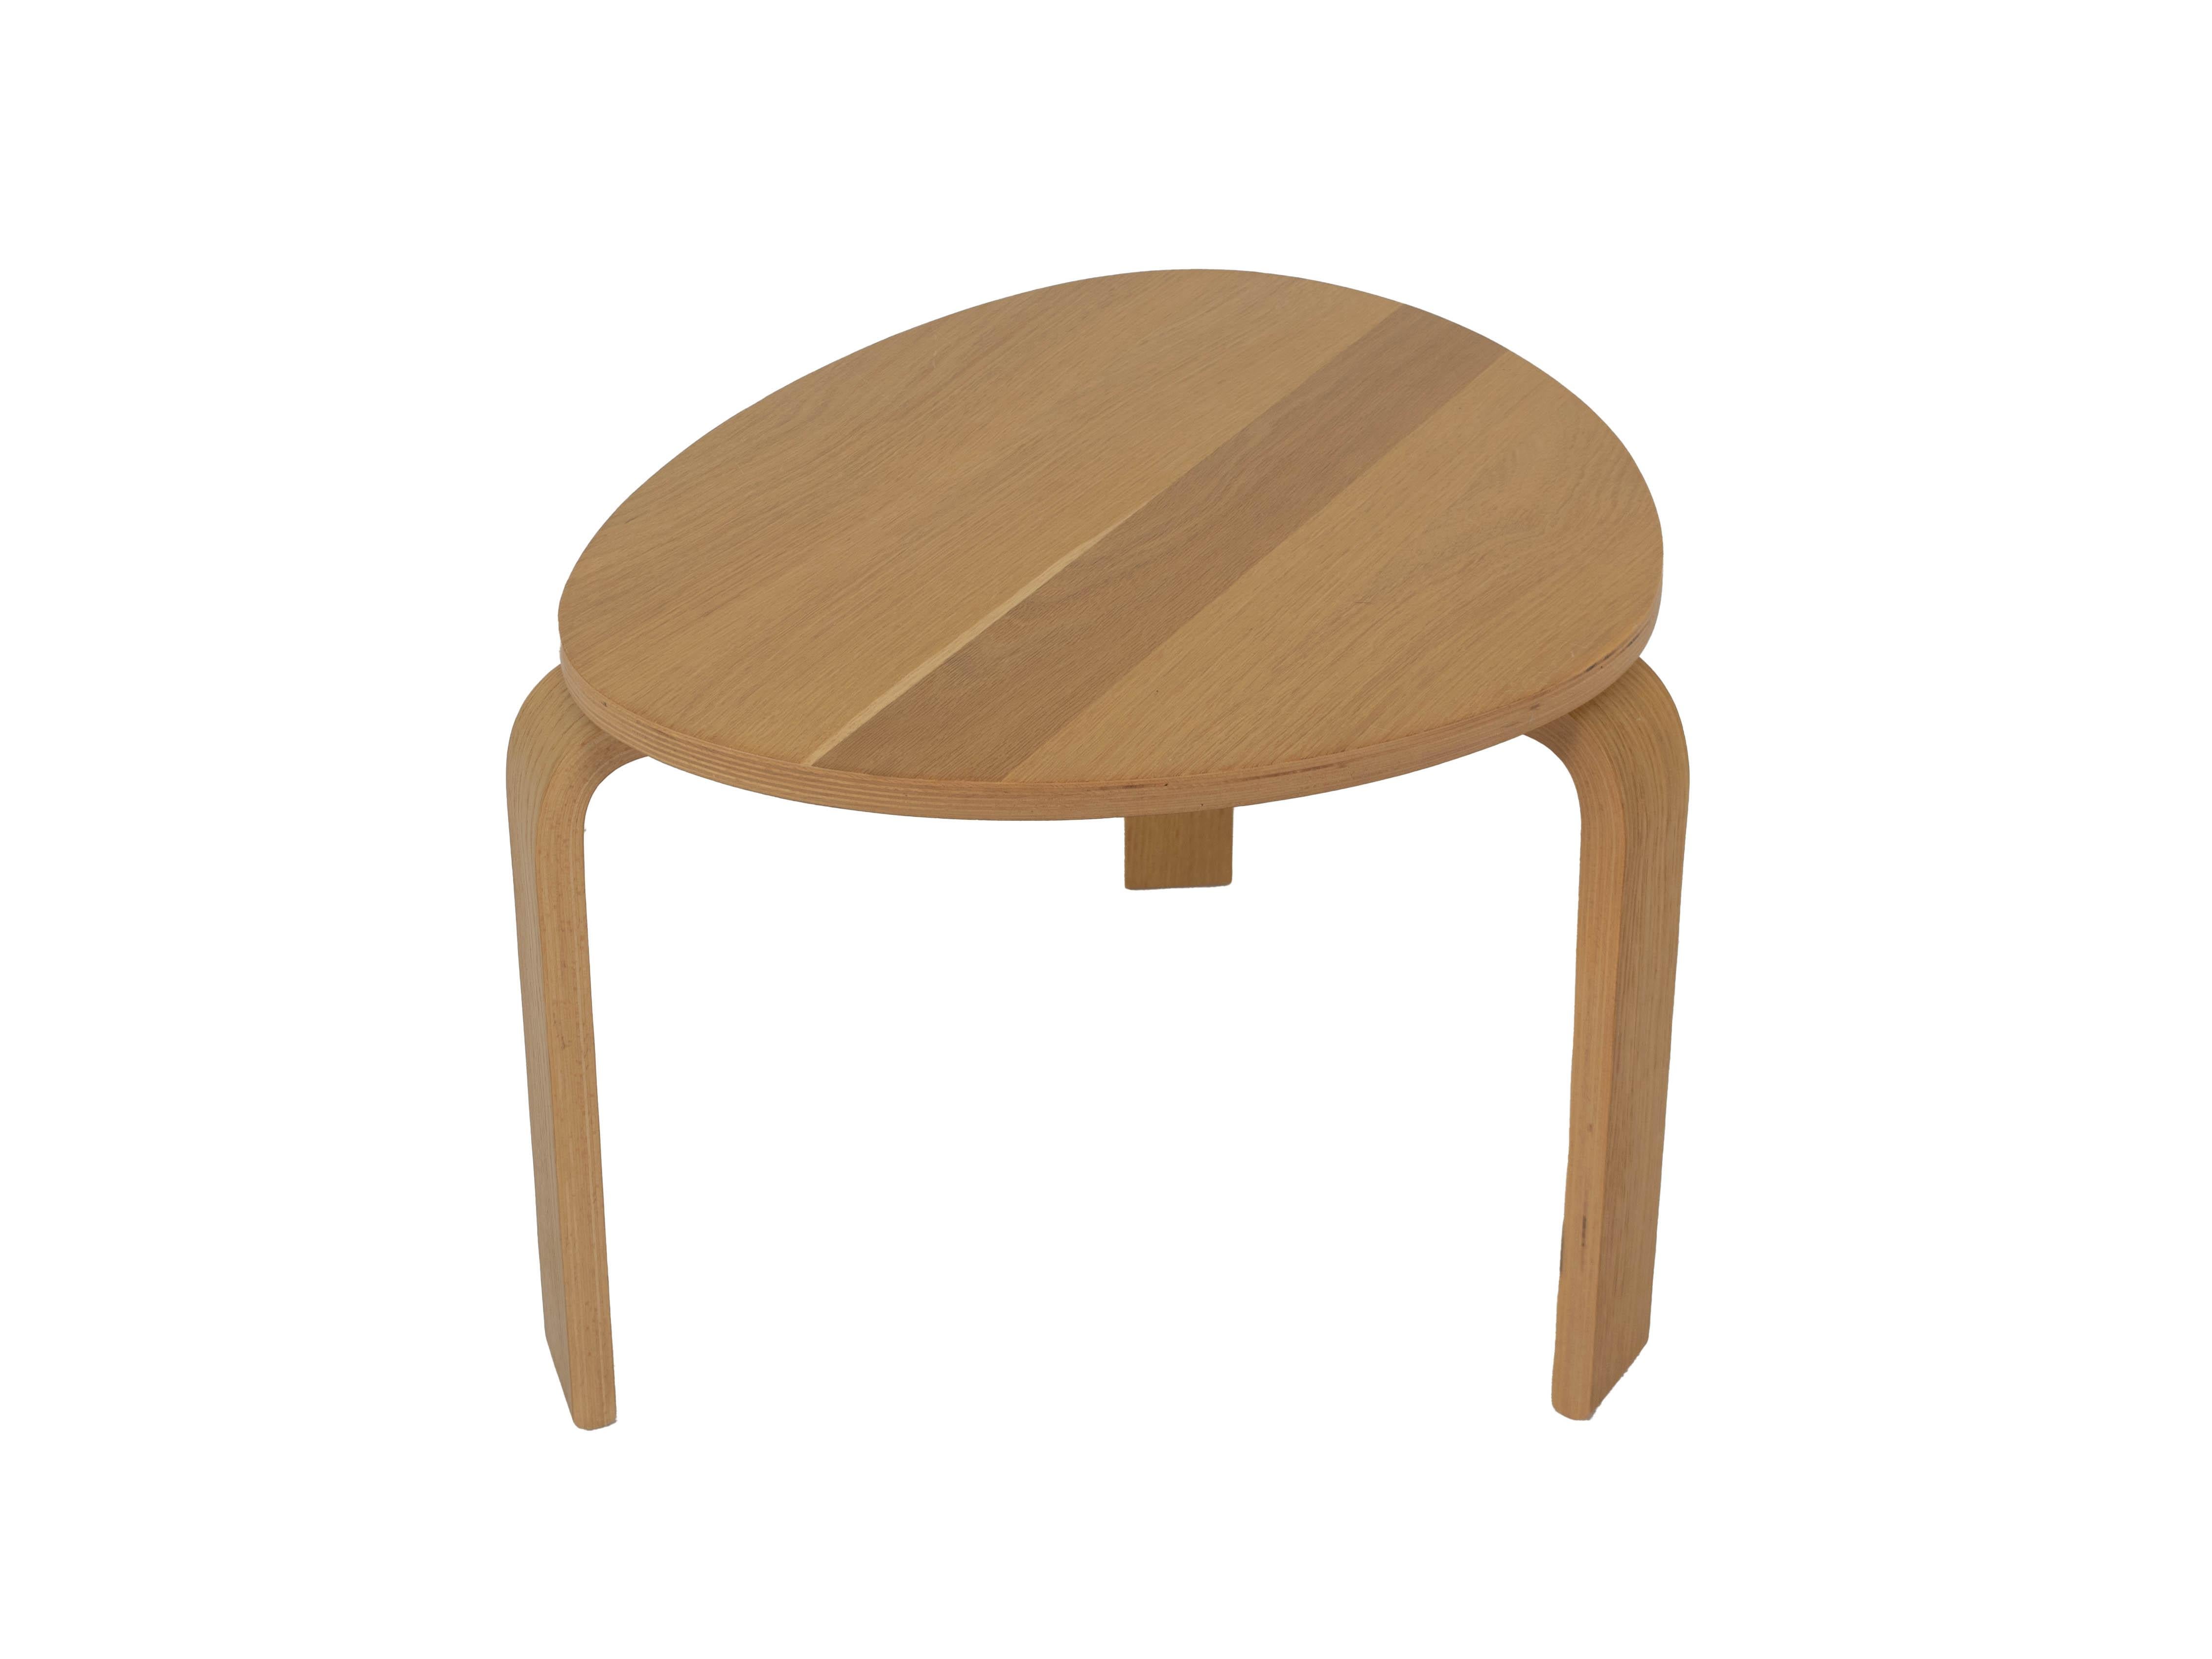 Charming Alvar Aalto style side table in oak from Denmark 1980s. This table is practical and has a minimal design. The top is interesting due to its shape that is a mix between an oval and a triangle. It is in great condition with only some small